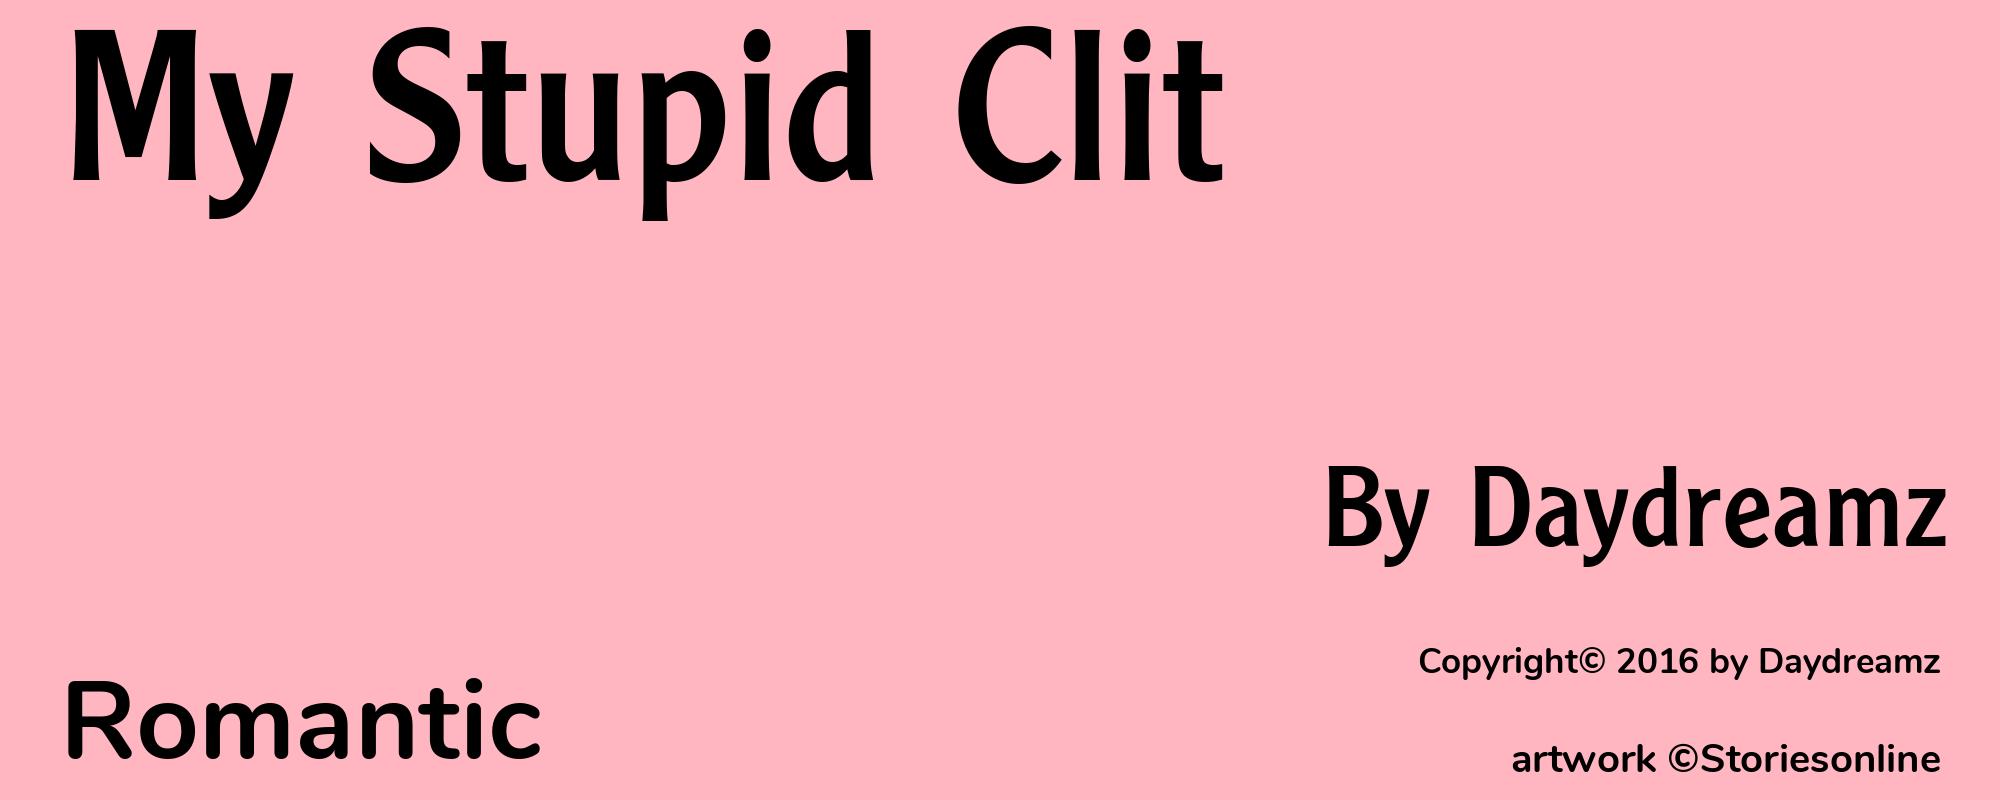 My Stupid Clit - Cover